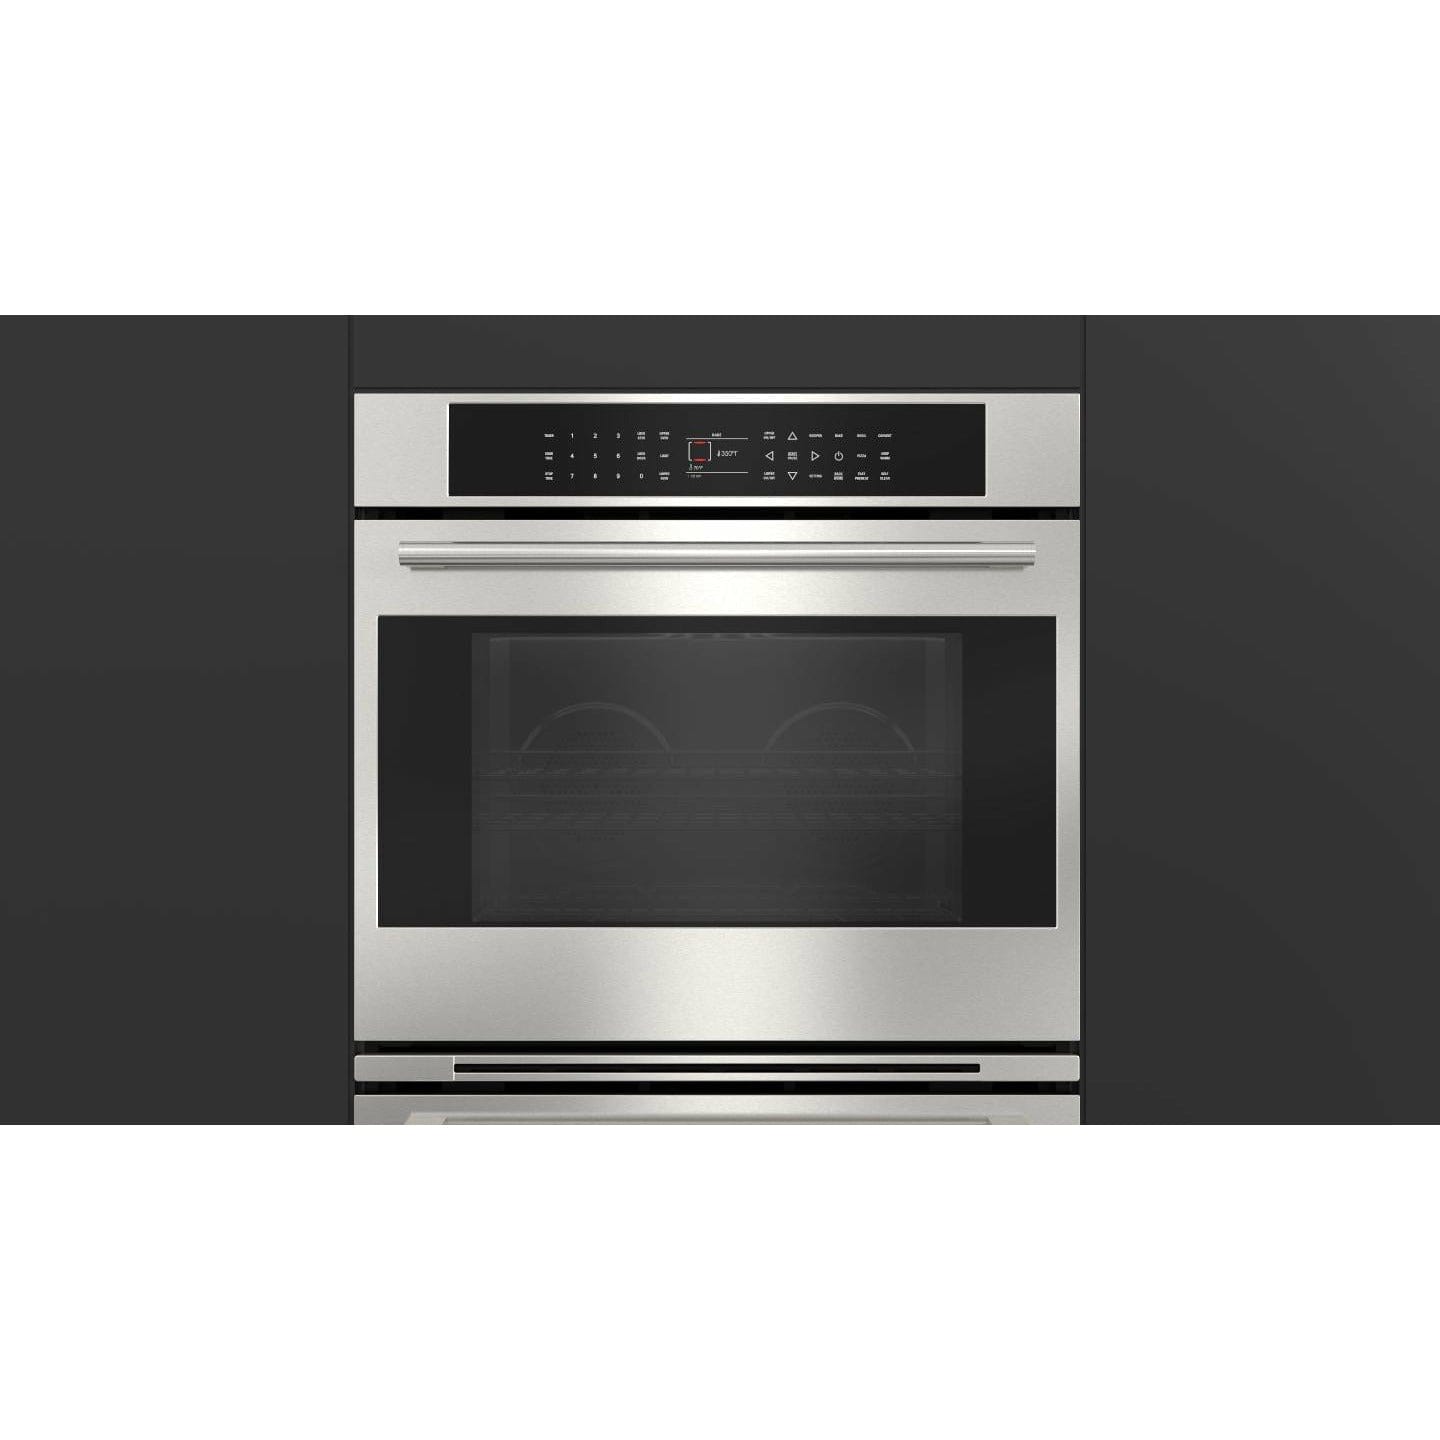 Fulgor Milano 30" Electric Double Wall Oven with 4.4 cu. ft. Capacity - F7DP301 Wall Oven Luxury Appliances Direct